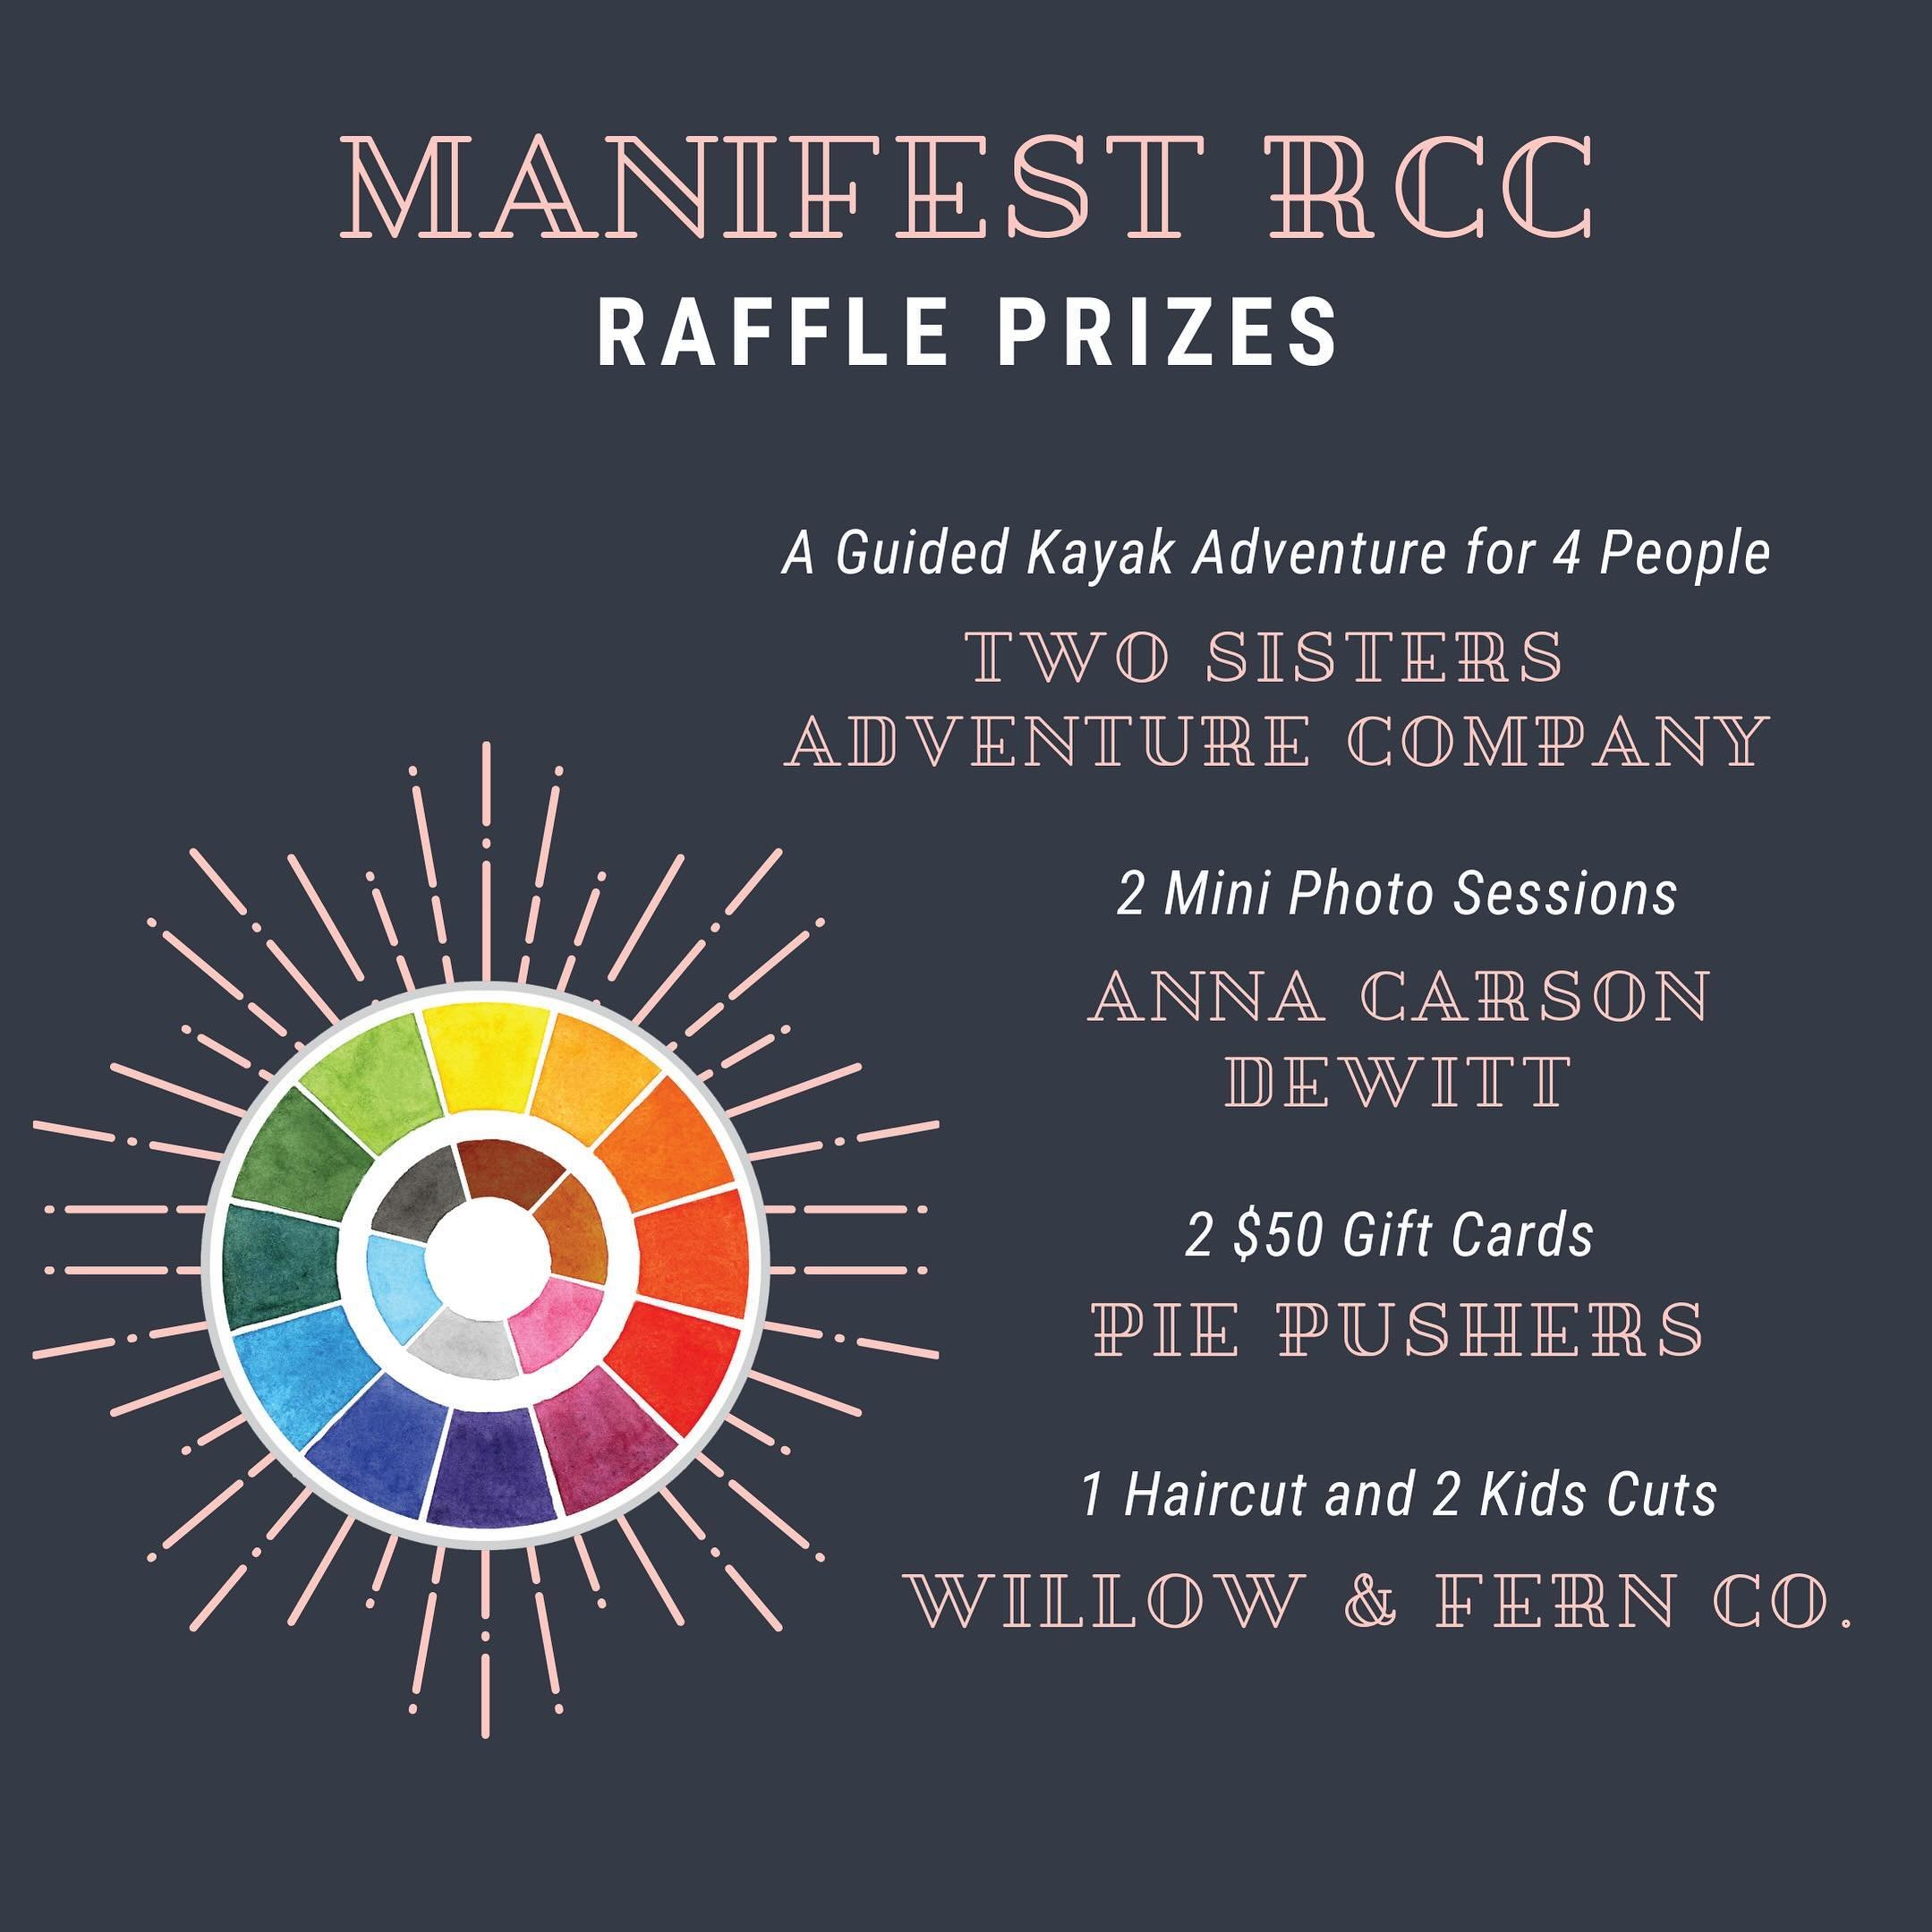 Thank you to all the businesses that donated raffle prizes for Manifest RCC attendees! Everyone will get a free raffle ticket at check in! Don&rsquo;t miss out on the opportunity to win one of these prizes:

- A guided kayak trip for 4 people from @t